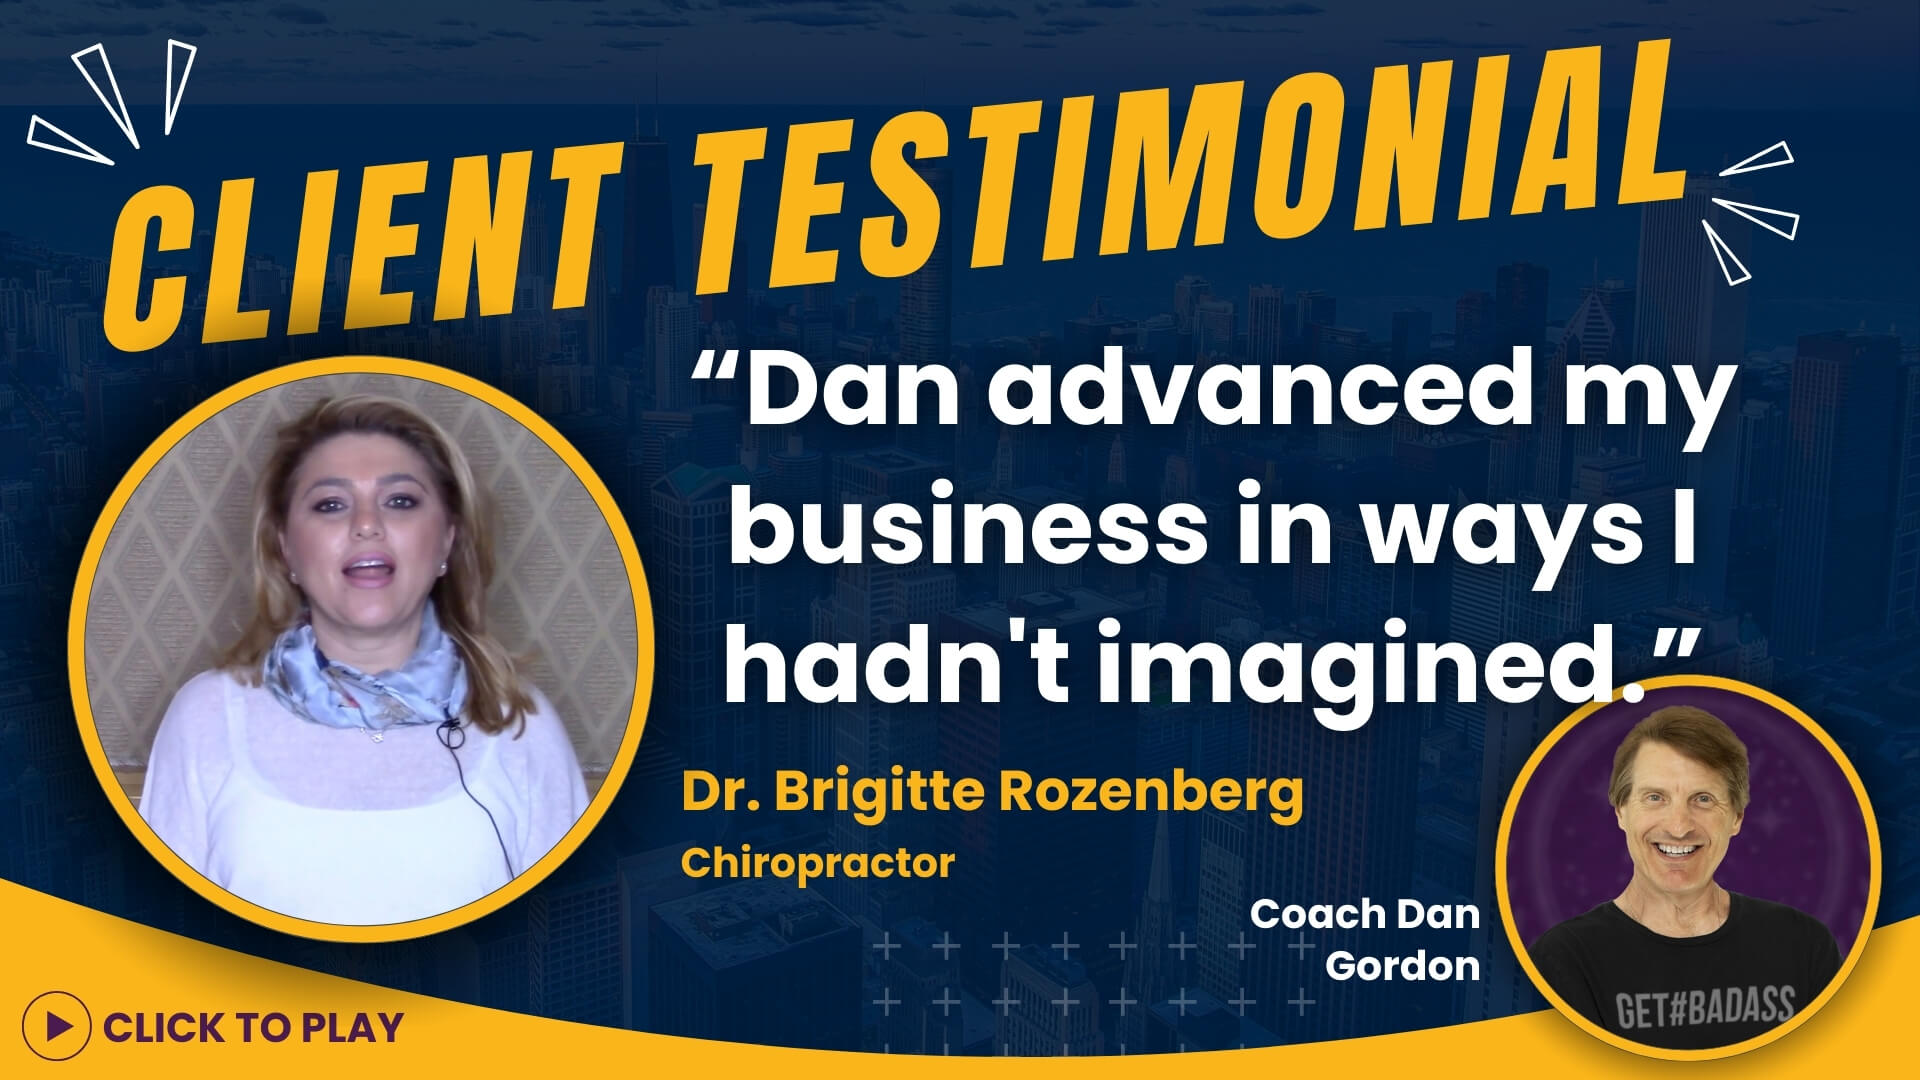 Chiropractor Dr. Brigitte Rozenberg shares how Coach Dan Gordon helped advance her business beyond her expectations, with a 'Click to Play' testimonial video feature.